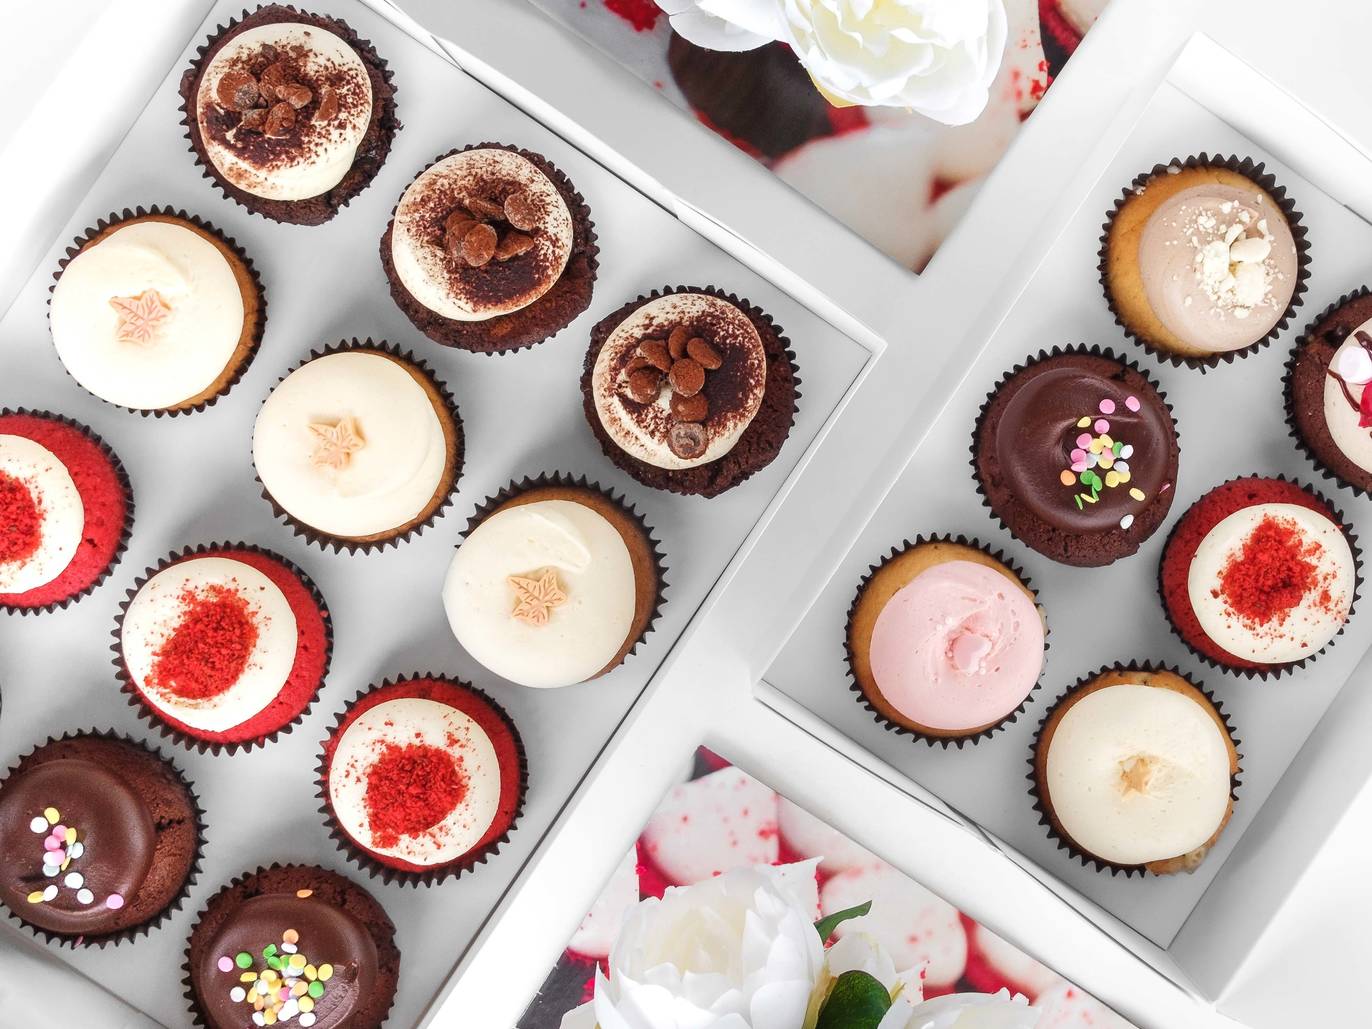 The best cupcakes in Sydney that you can now have delivered